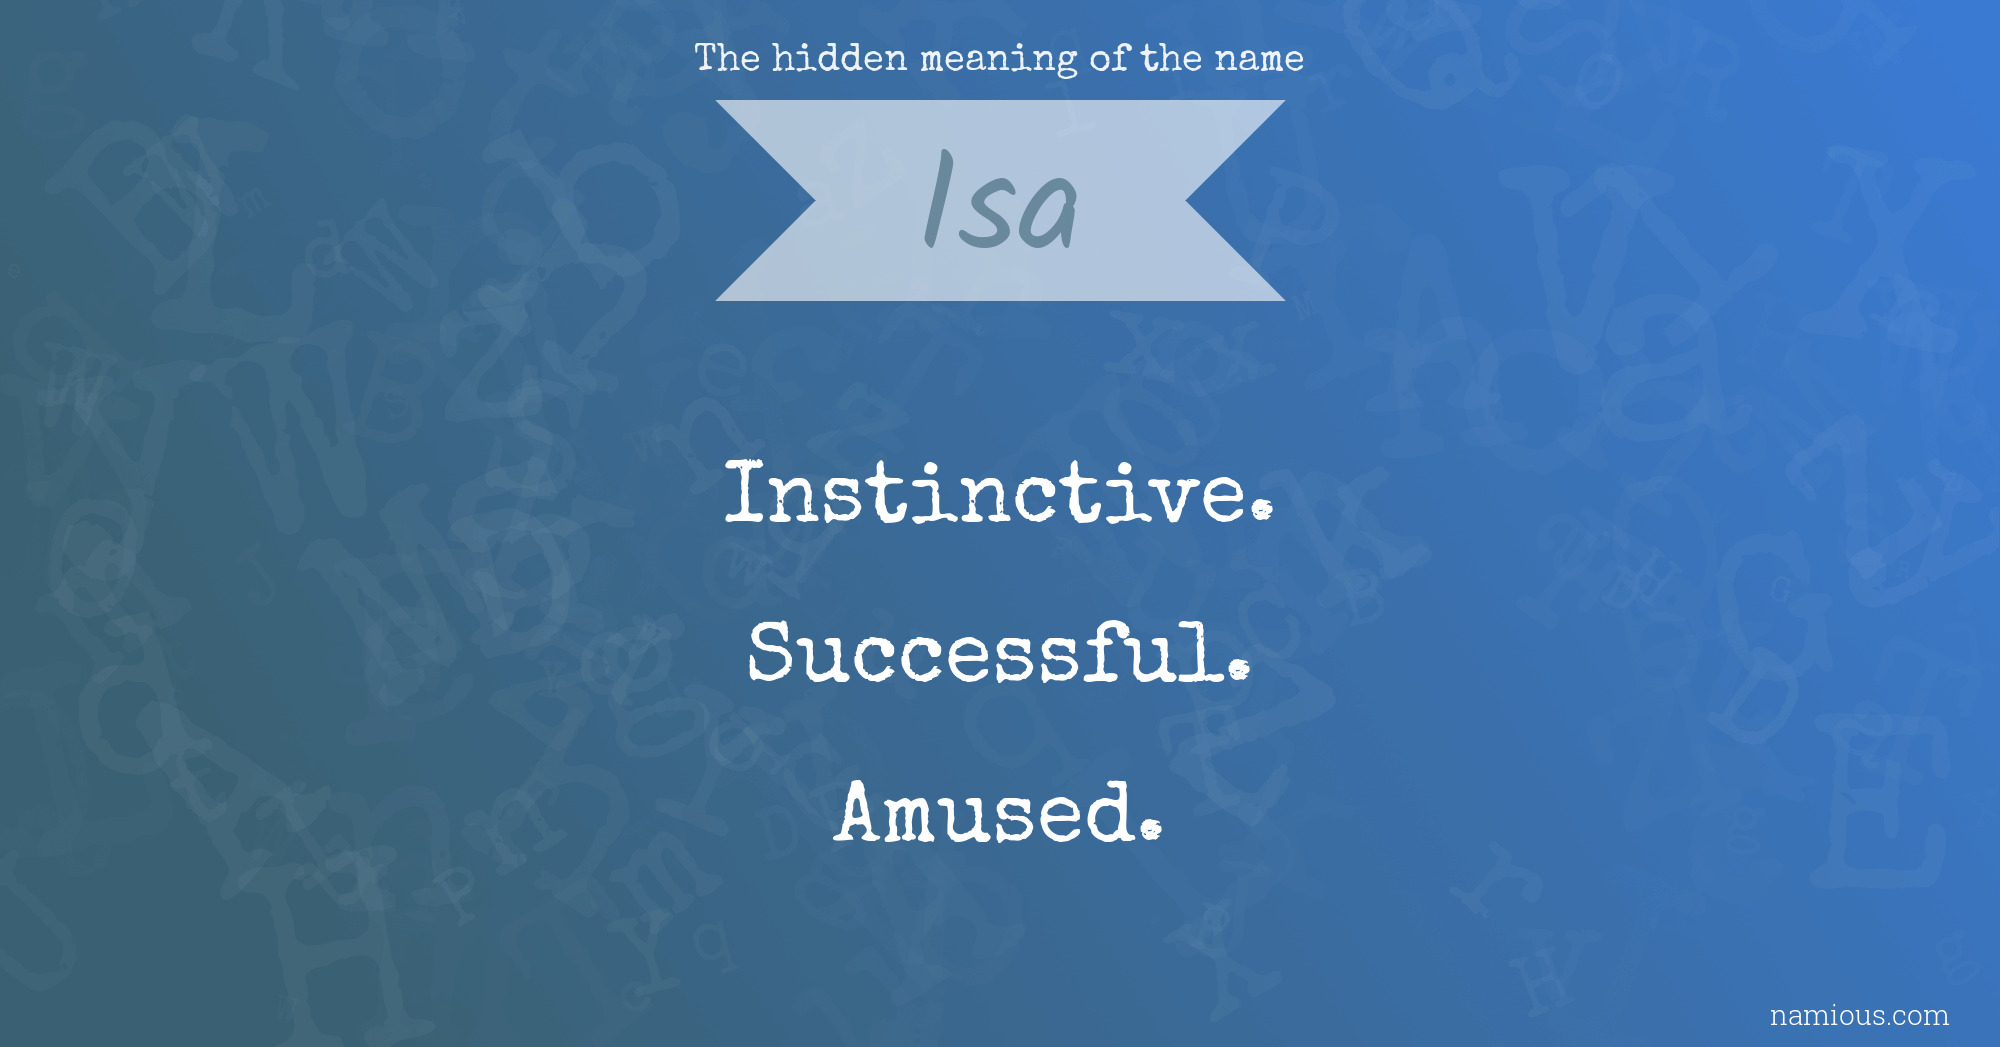 The hidden meaning of the name Isa